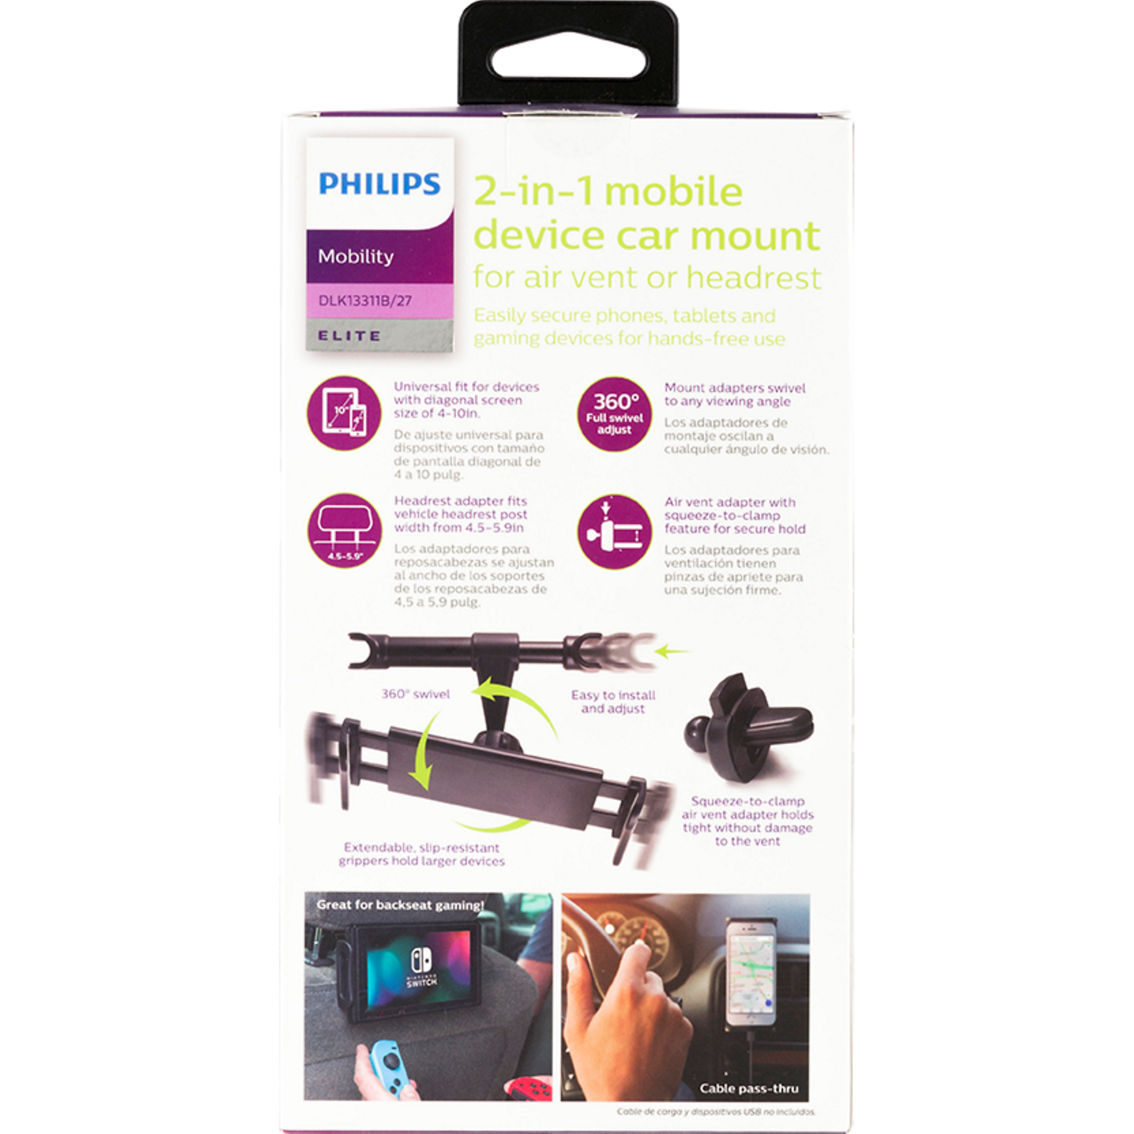 Philips 2 in 1 Metal Tablet/Cell Phone Car Mount - Image 2 of 2